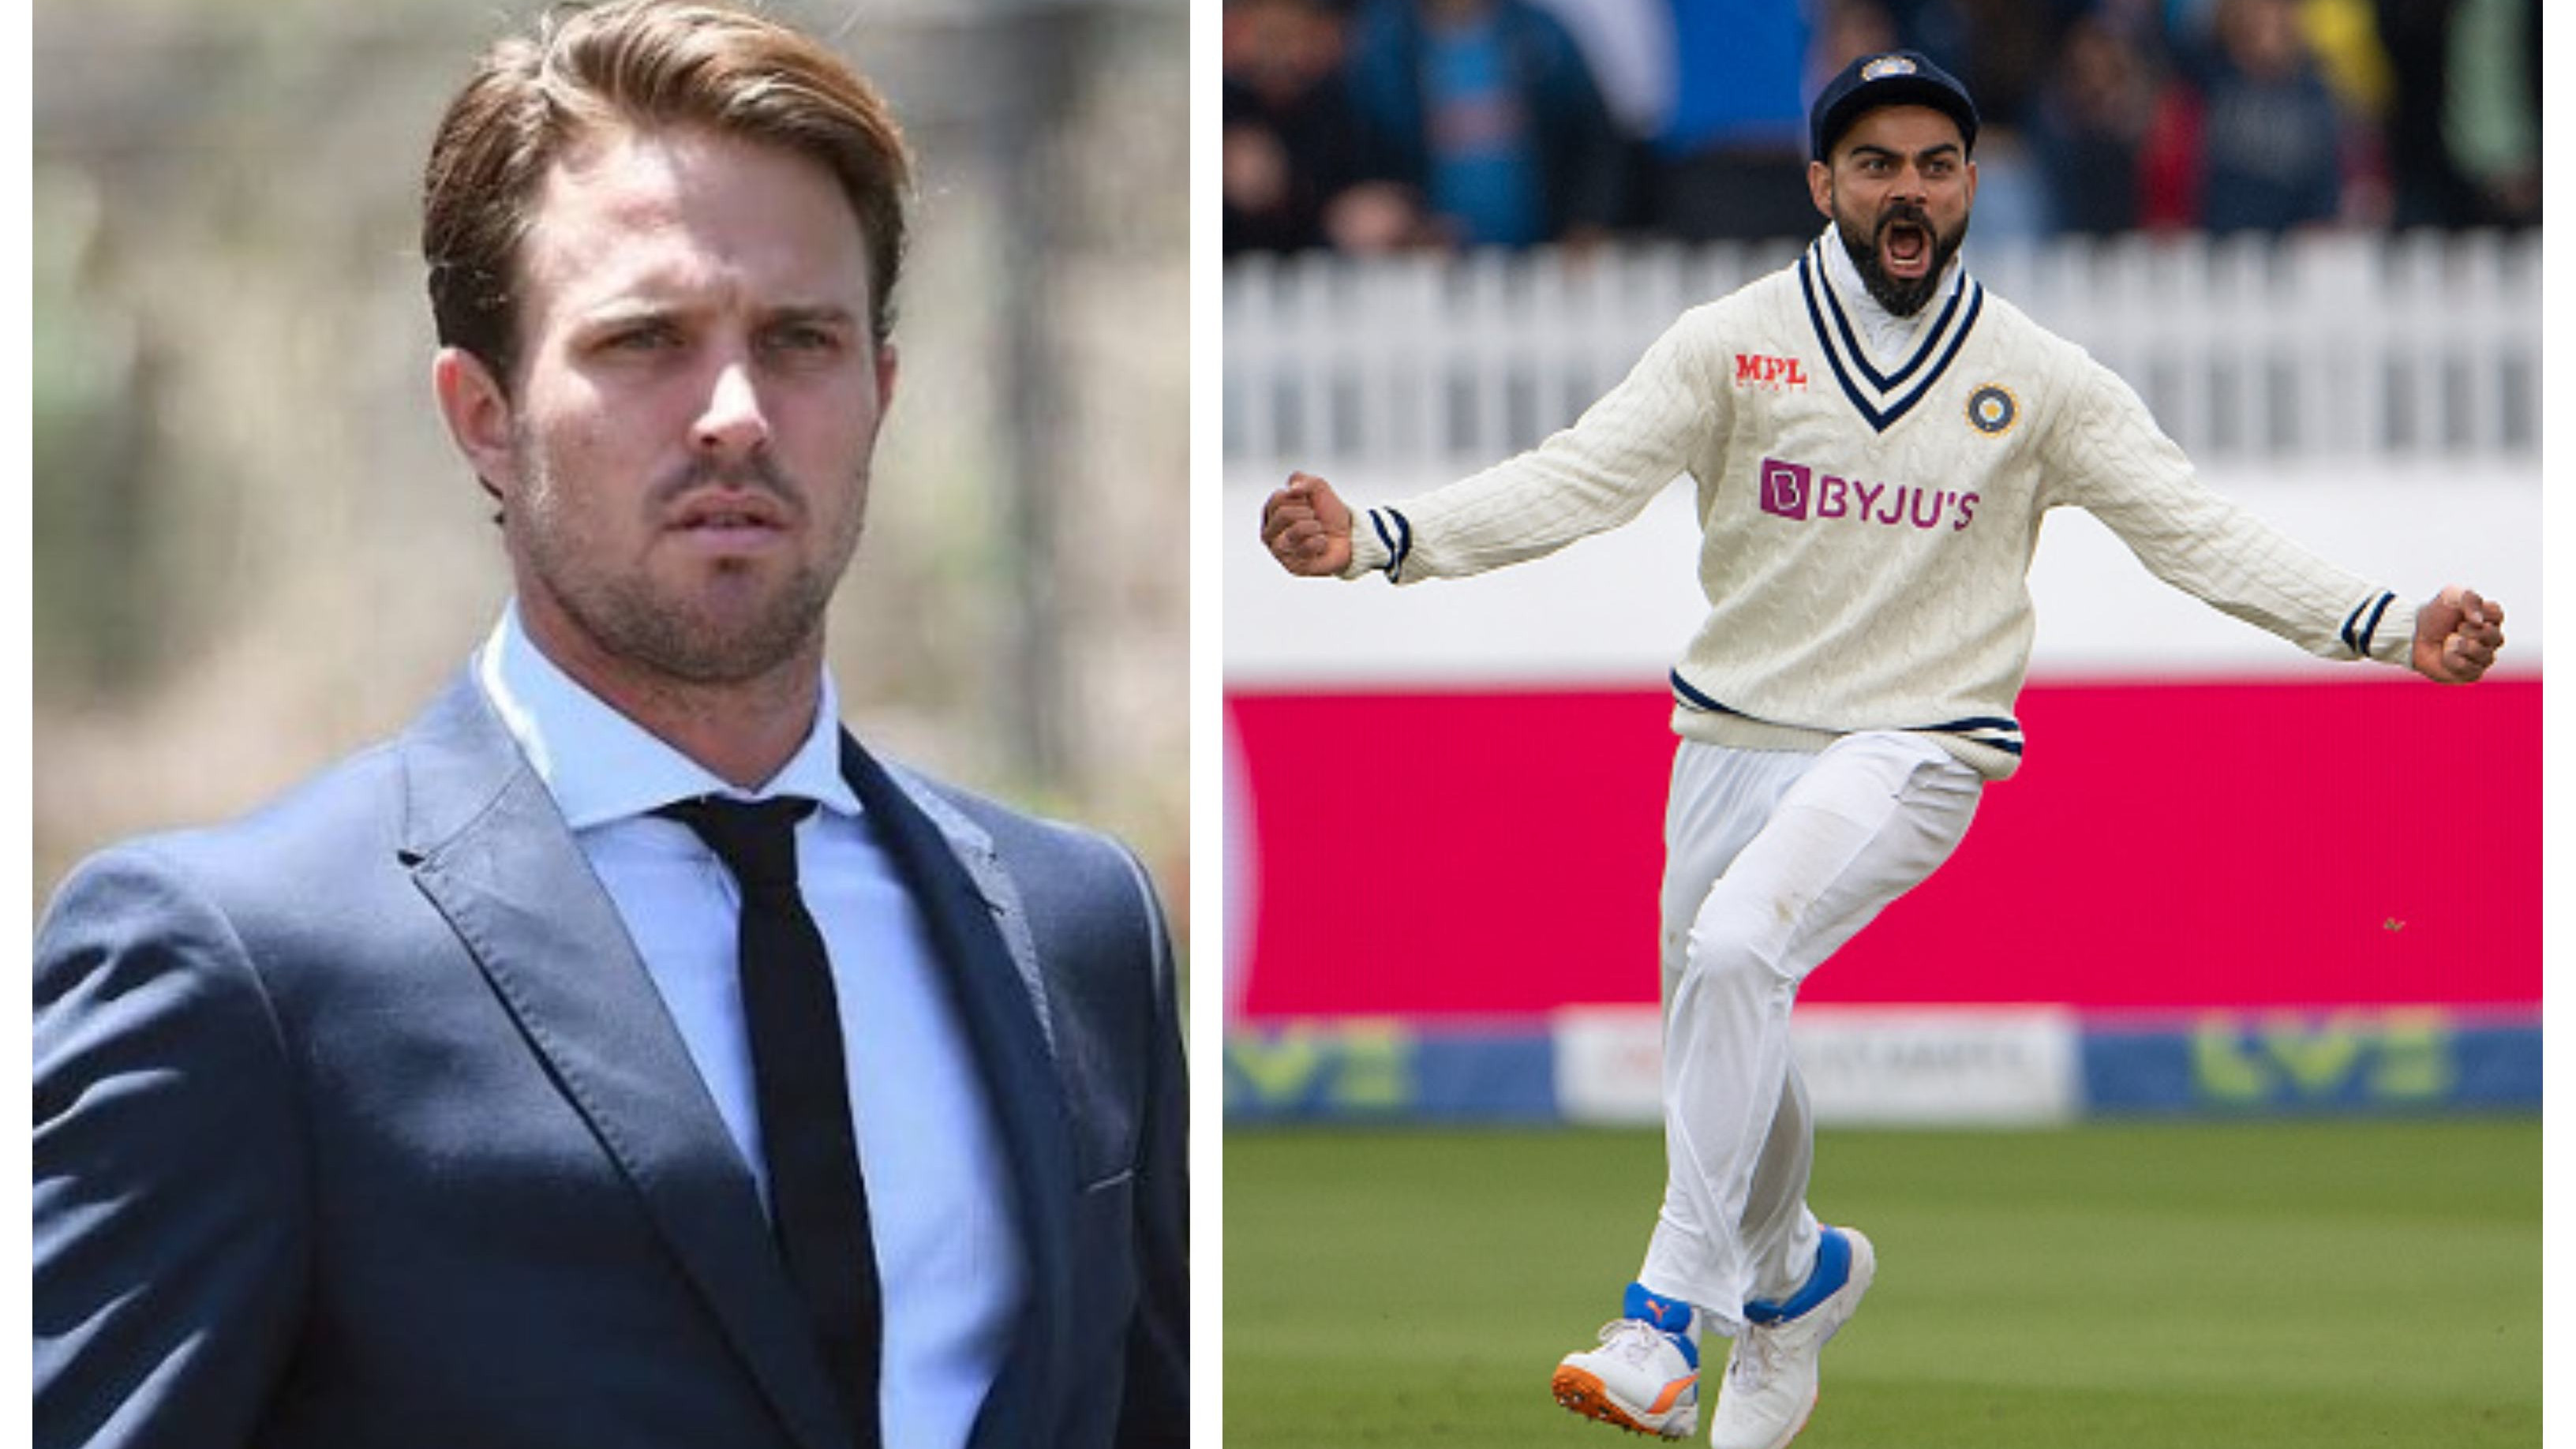 ENG v IND 2021: Nick Compton calls Virat Kohli ‘most foul-mouthed individual’, recalls his swearing from 2012 series